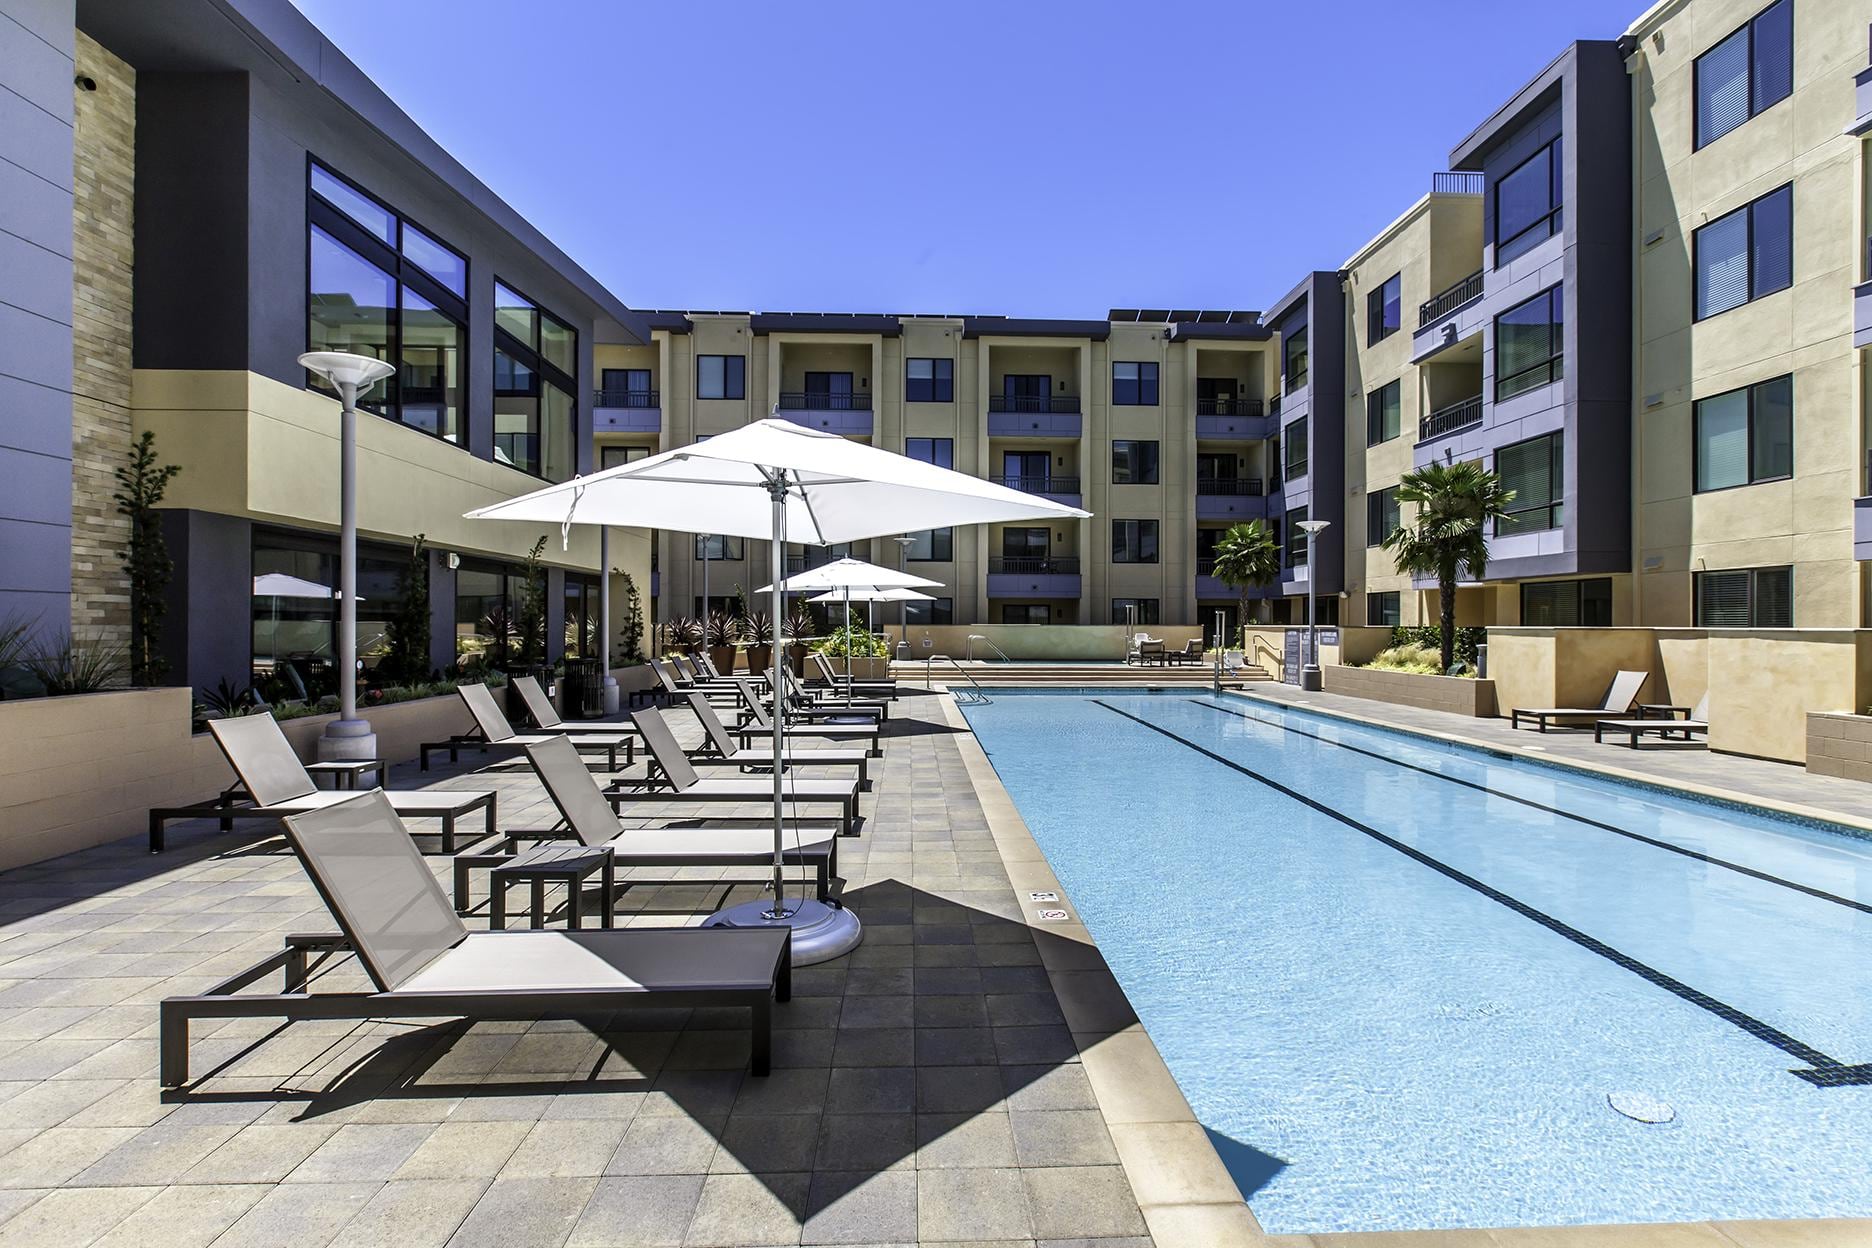 Apartments in Foster City-One Hundred Grand Swimming Pool Surrounded by Shaded Seating and Lounge Chairs